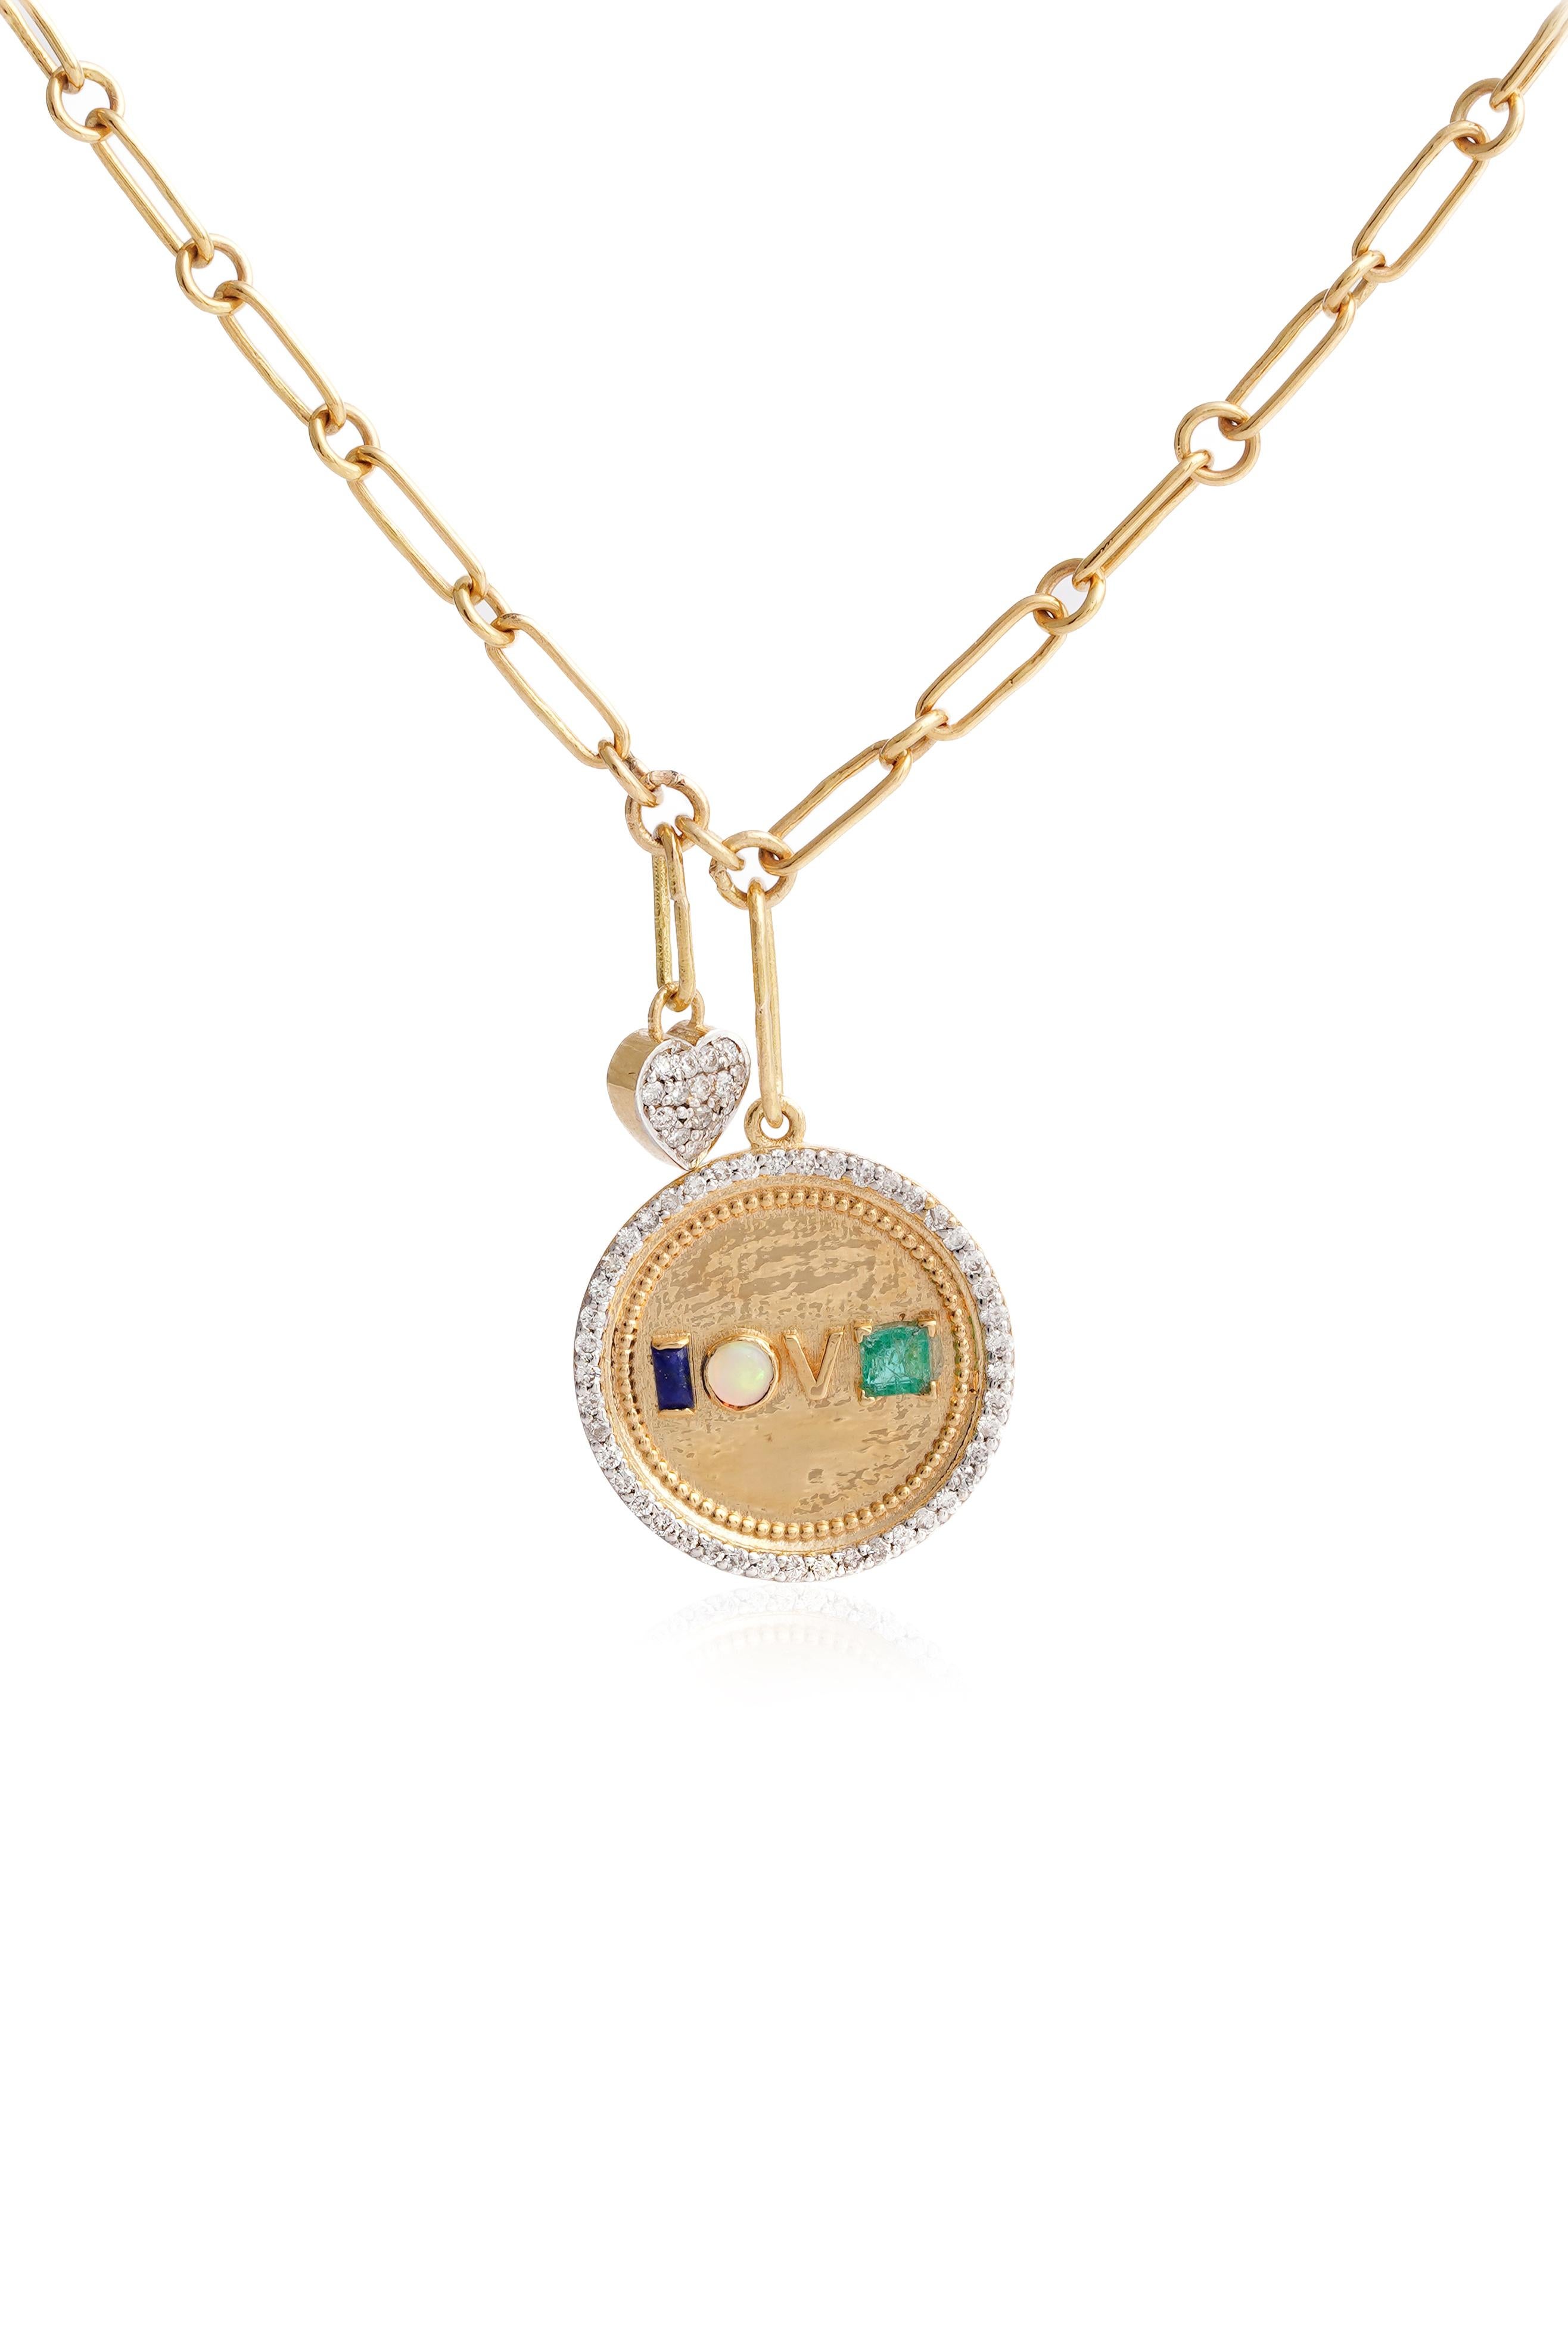 Love Gold and Diamond Medallion Necklace For Sale